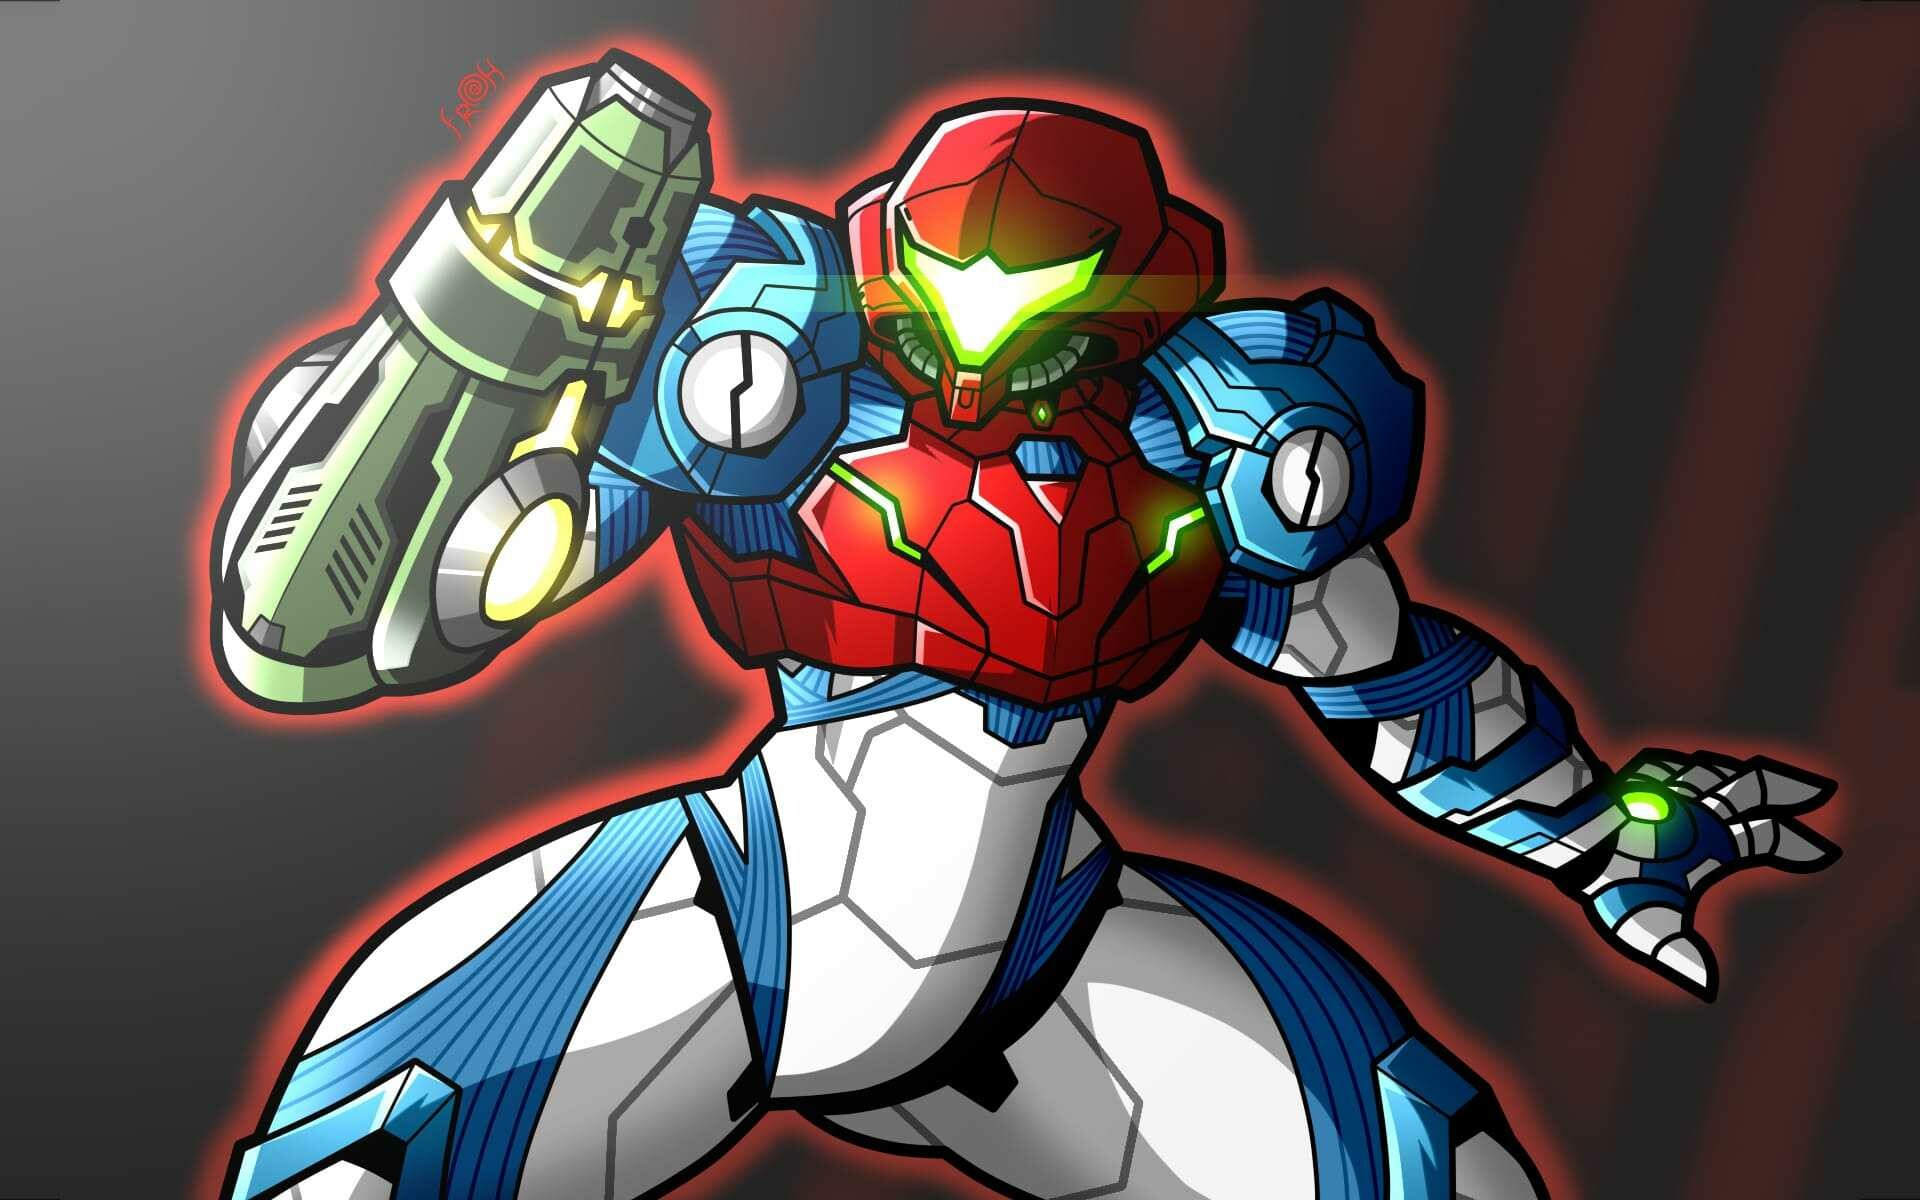 Metroid Dread: Samus encounters a Chozo warrior deep underground, who destroys the exit, defeats her in combat, and strips her suit of most of its abilities, Video game. 1920x1200 HD Wallpaper.